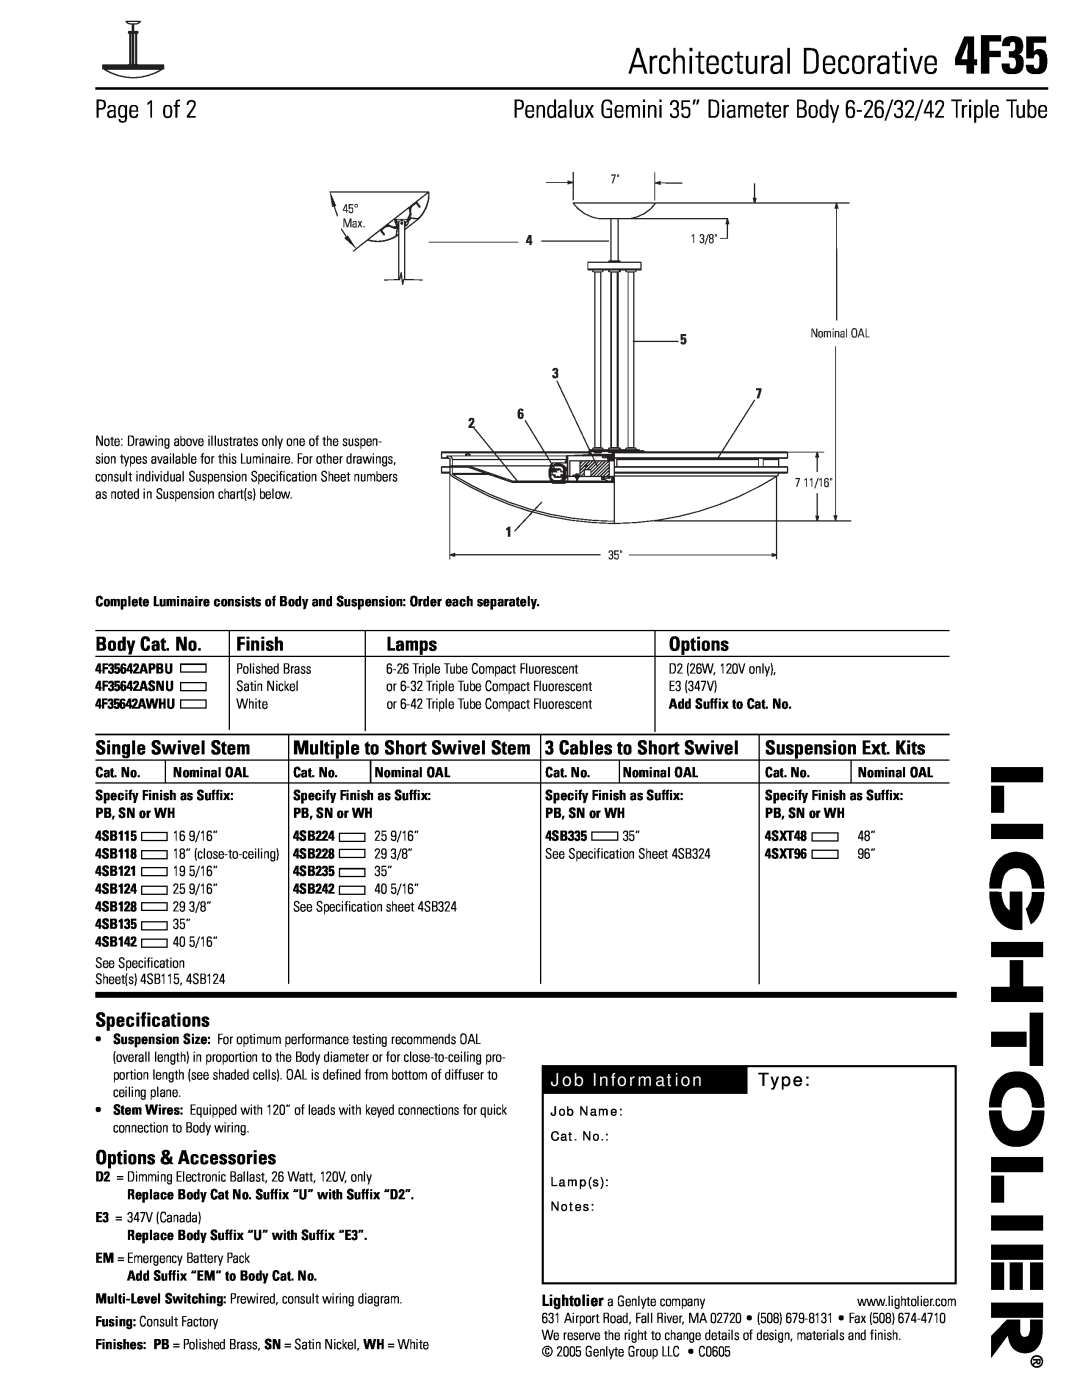 Lightolier specifications Architectural Decorative 4F35, Page 1 of, Finish, Lamps, Options, Single Swivel Stem, Type 